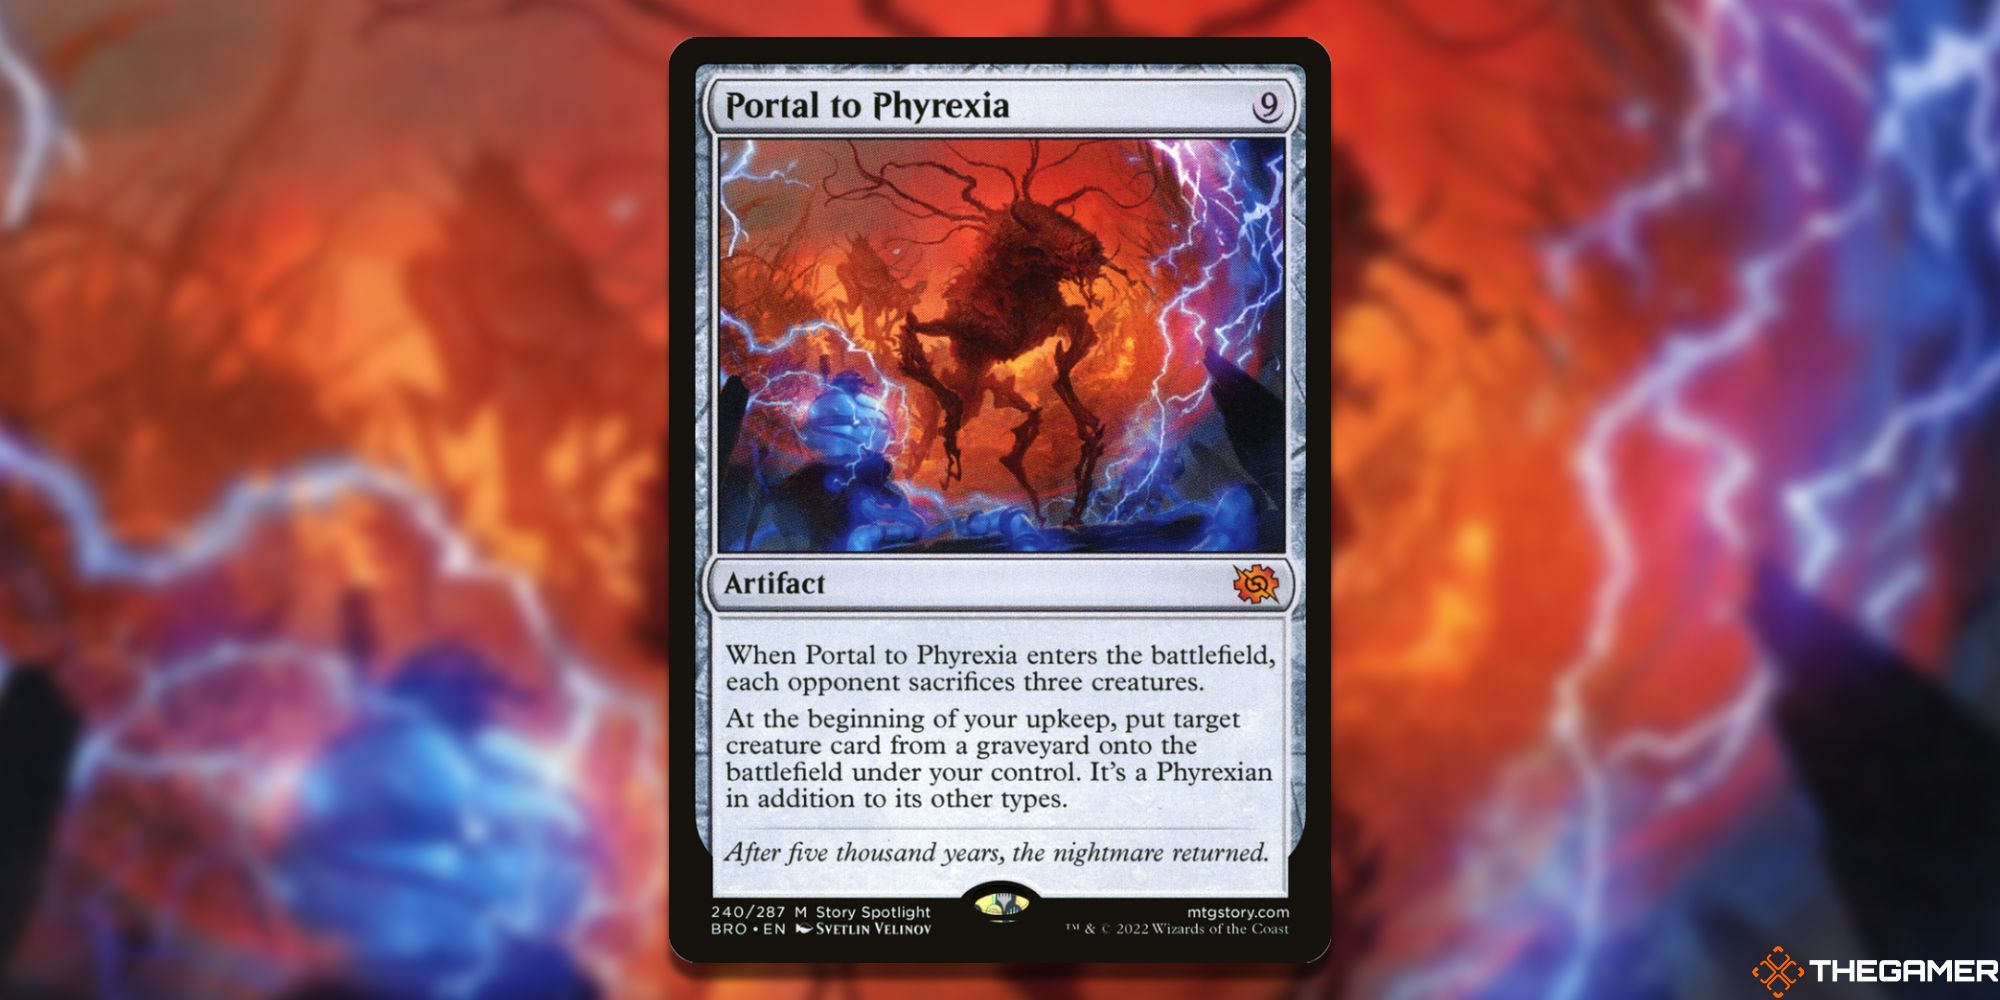 Image of the Portal to Phyrexiacard in Magic: The Gathering, with art by Svetlin Velinov-1